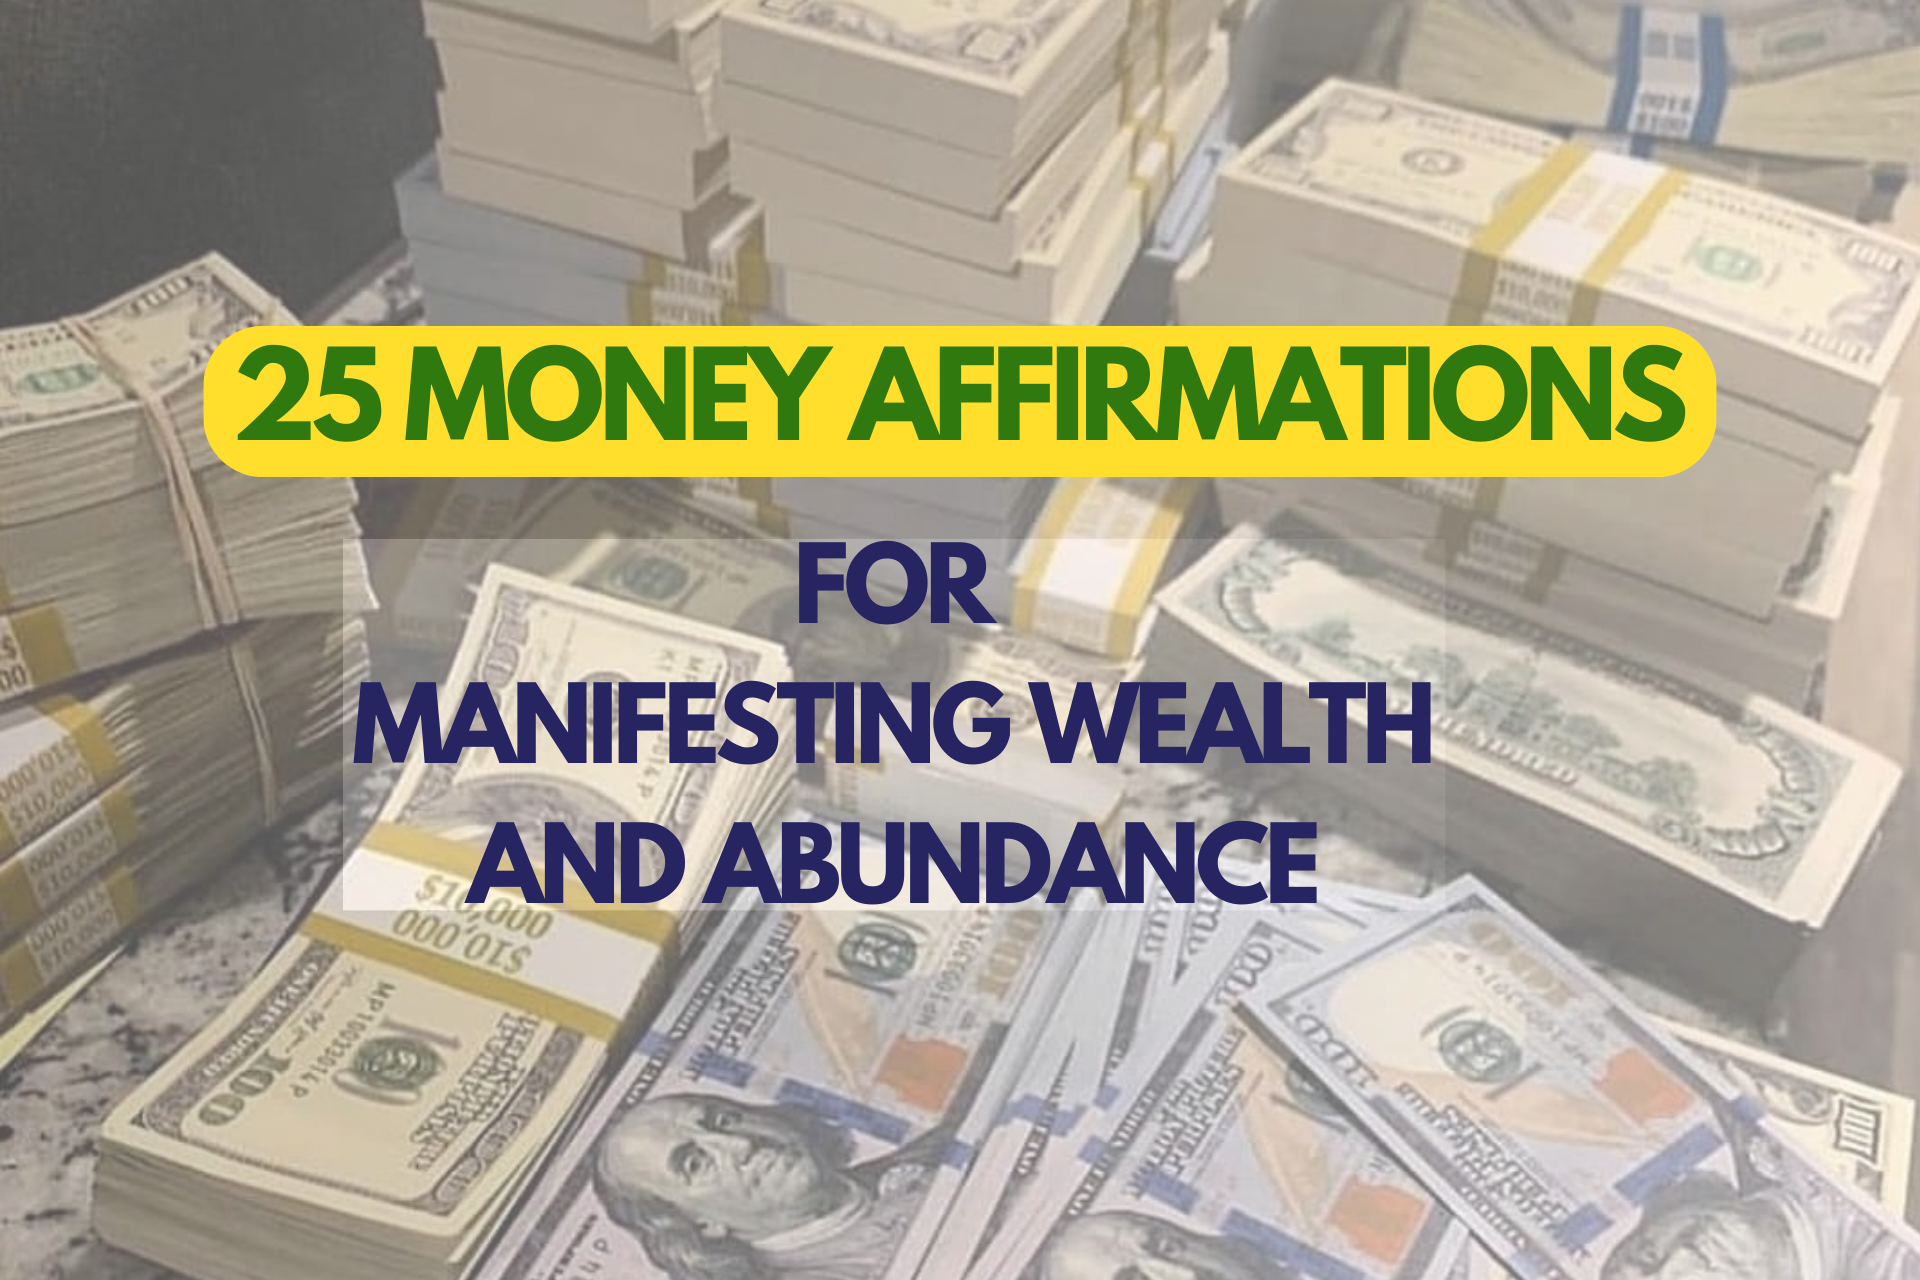 Read more about the article 25 Money Affirmations for Manifesting Wealth and Abundance